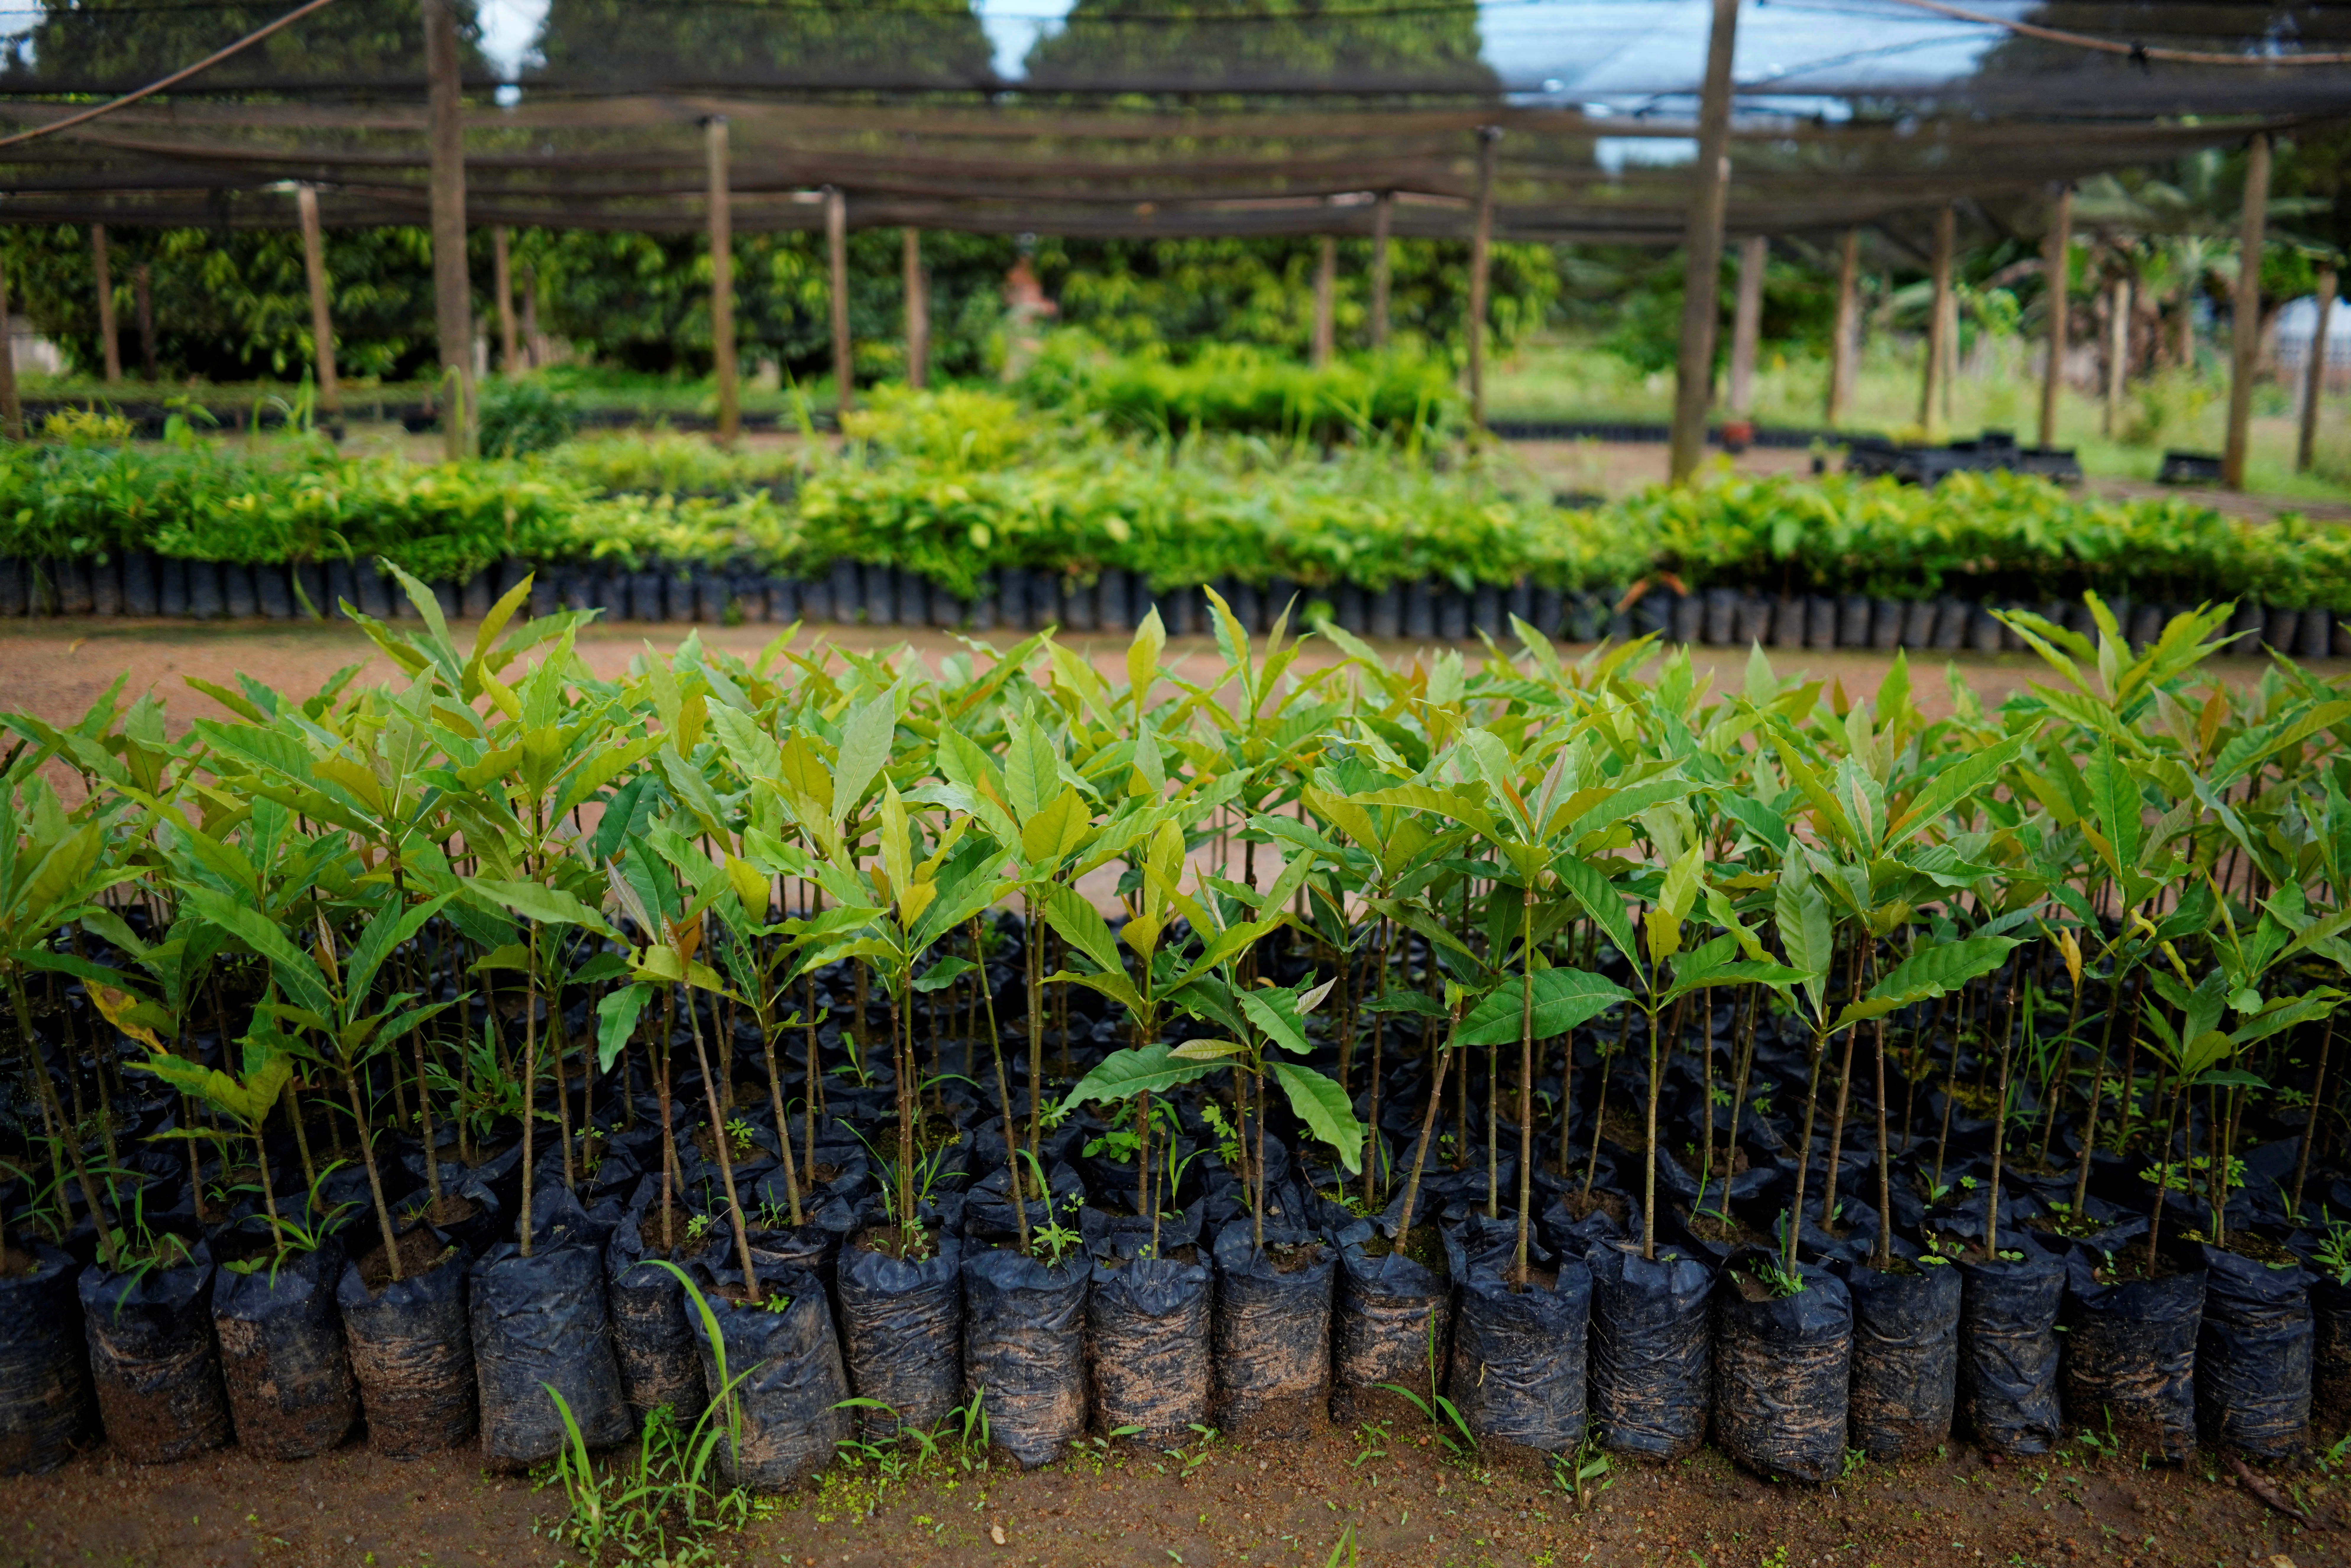 Planting trees could save the Amazon and the world's climate, it's harder than it sounds